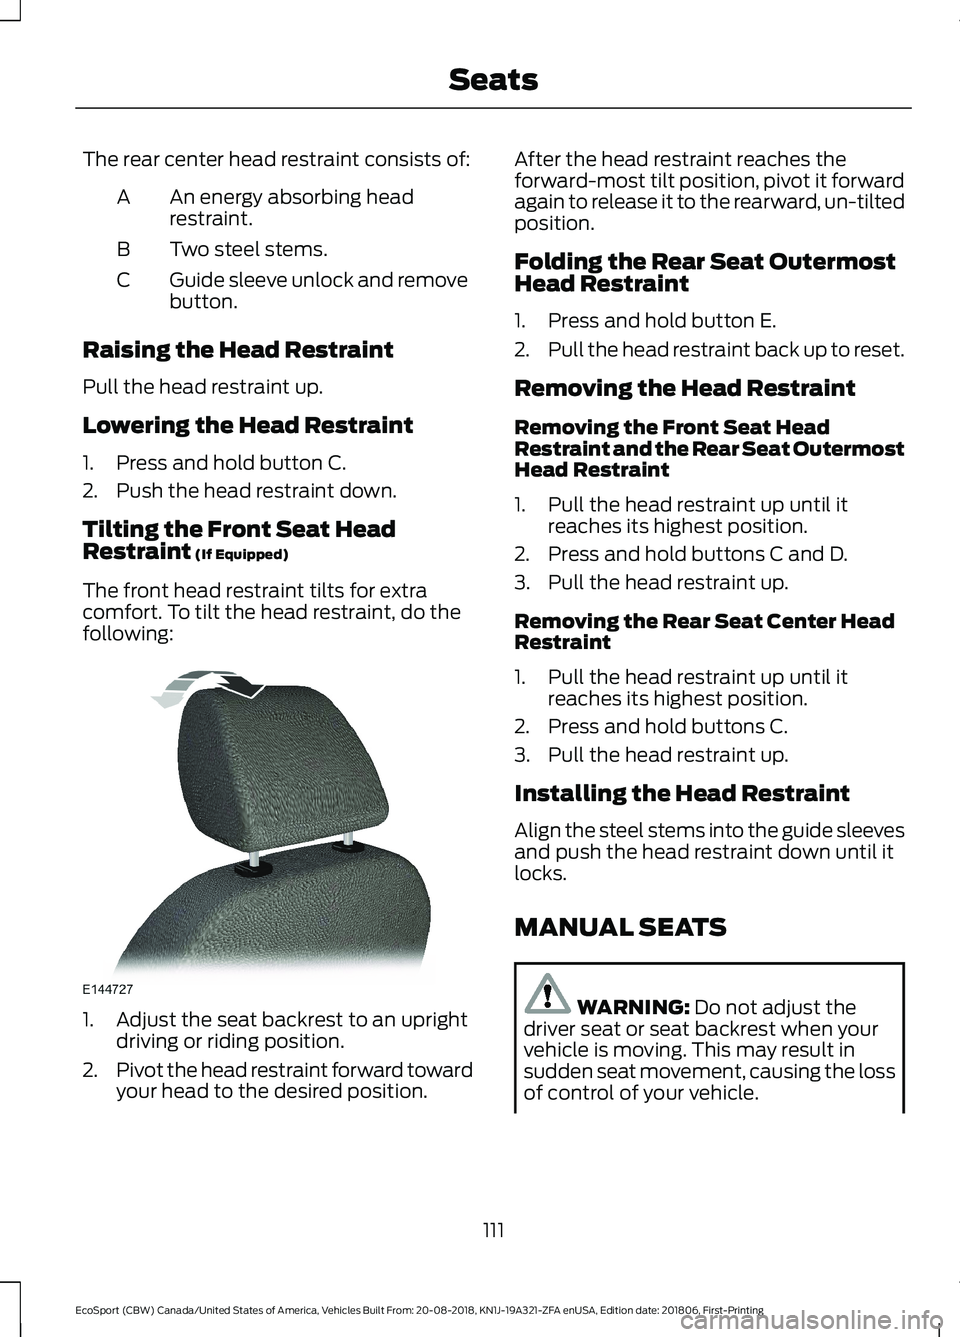 FORD ECOSPORT 2019 User Guide The rear center head restraint consists of:
An energy absorbing headrestraint.A
Two steel stems.B
Guide sleeve unlock and removebutton.C
Raising the Head Restraint
Pull the head restraint up.
Lowering